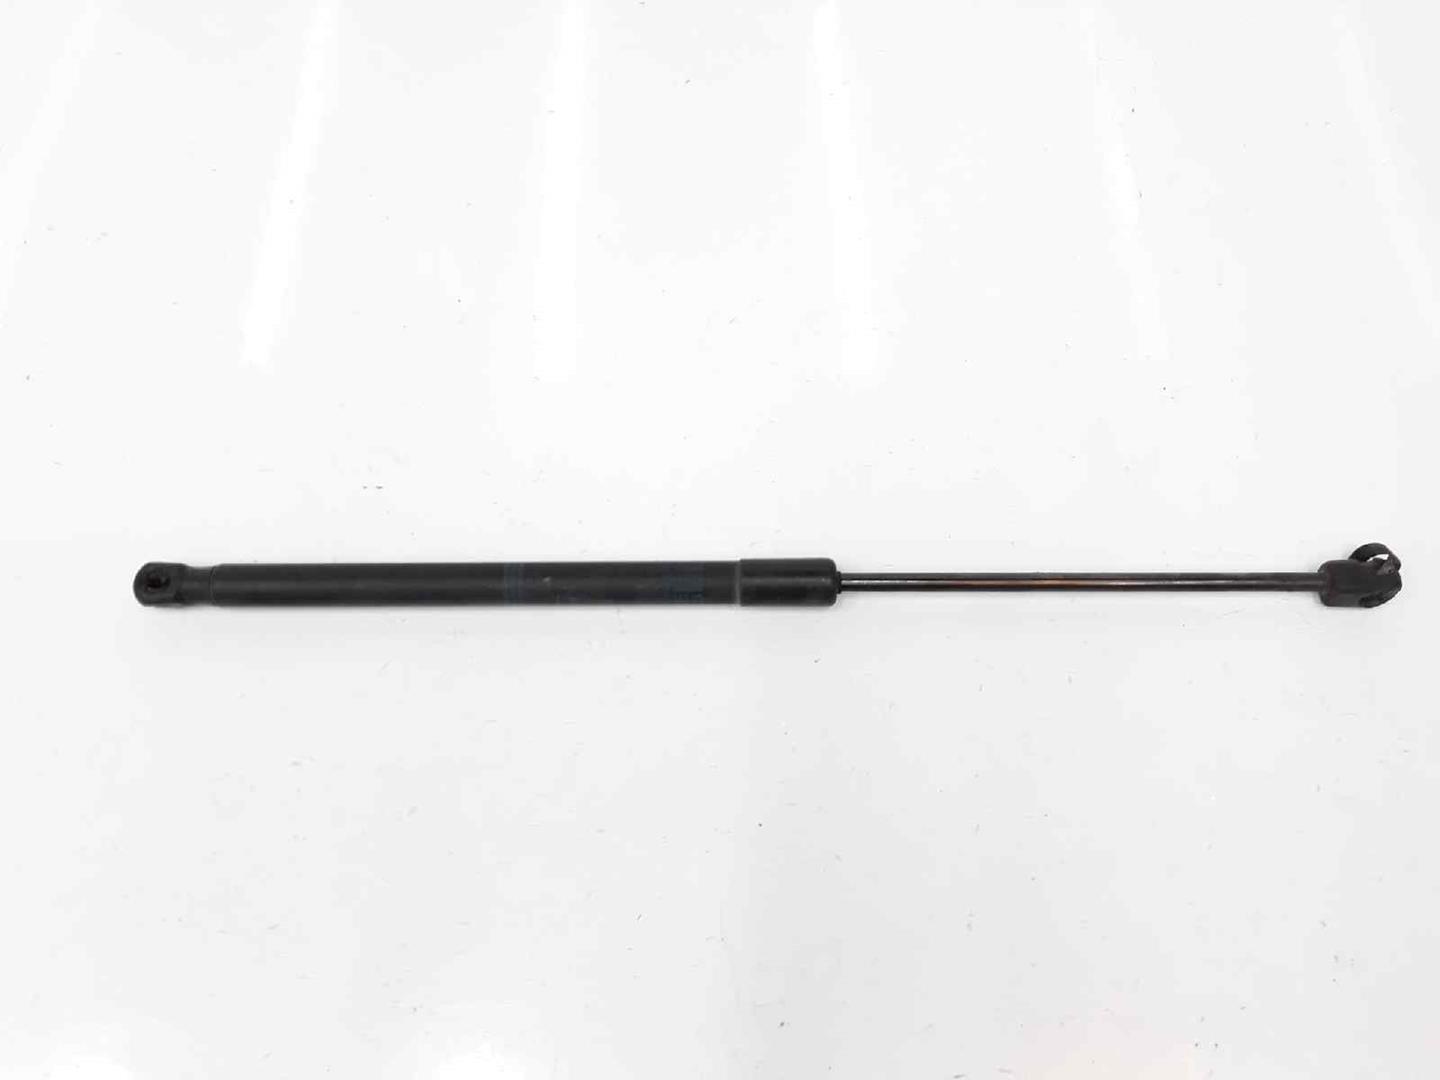 OPEL Astra H (2004-2014) Left Side Tailgate Gas Strut 13220159, 13220159, 0953VY0340N 19682989